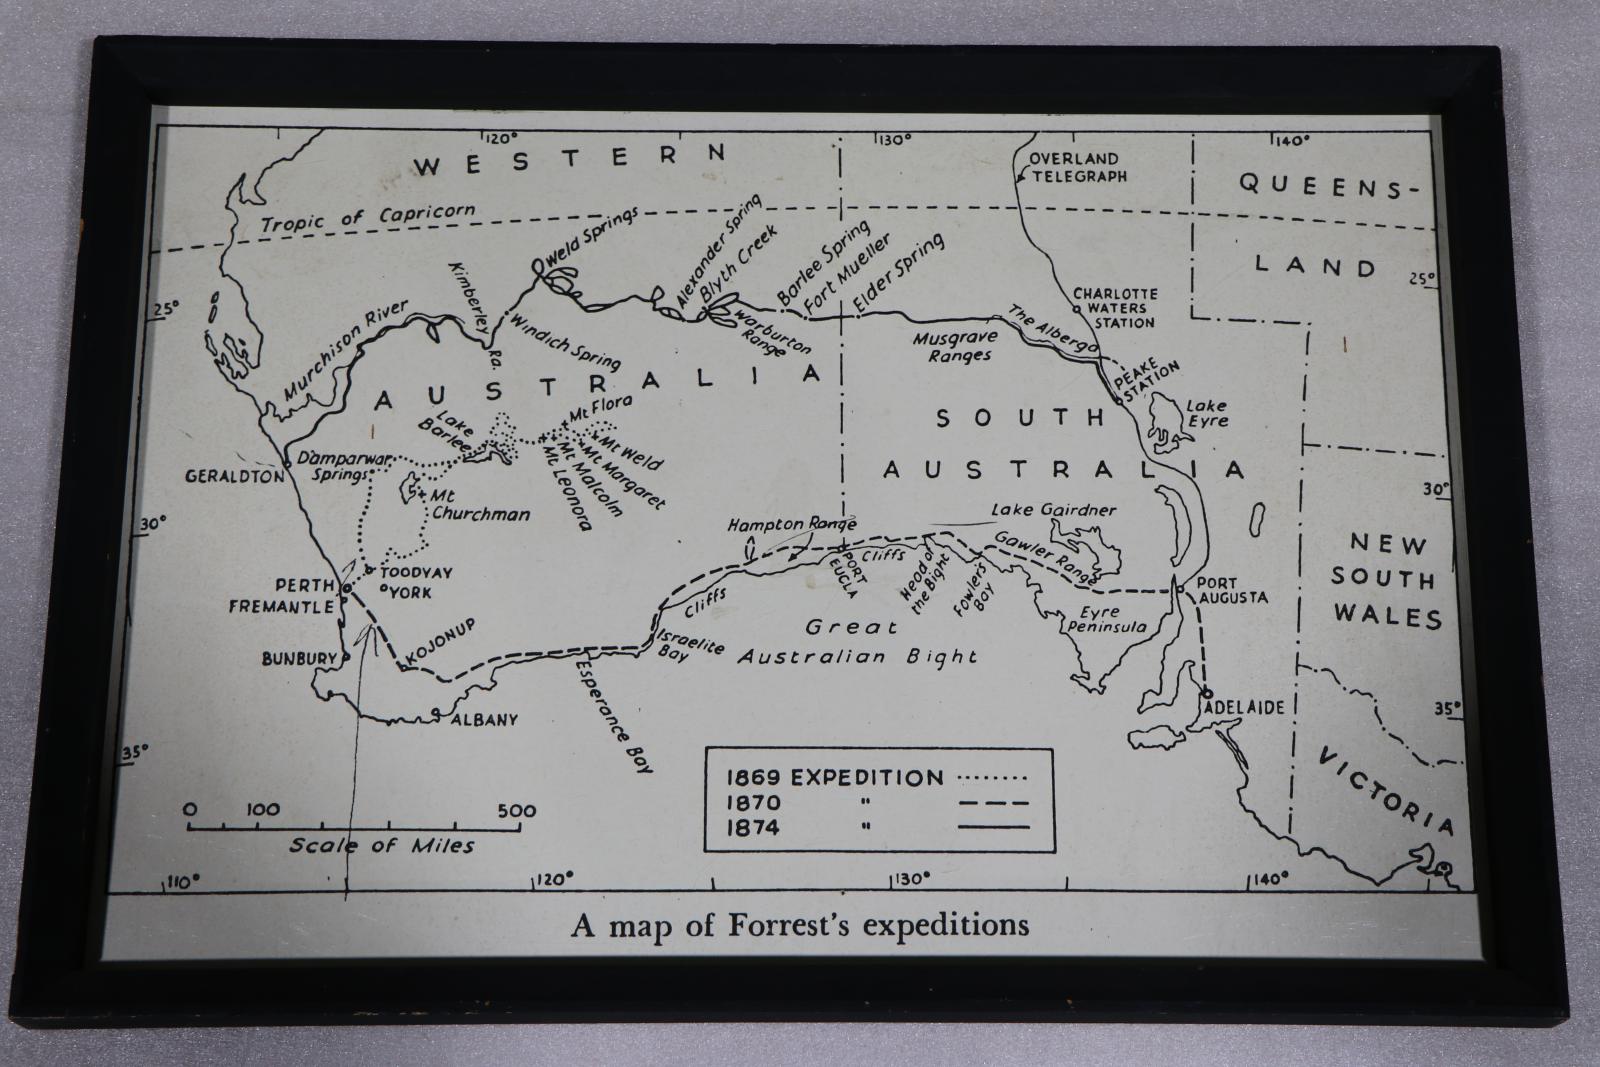 Map of Australia depicting majority of west and south. Titled 'A map of Forrest's expeditions', it is printed with black ink on a white background. States and key locations are labelled, with lines representing the trails of John Forrest's three major expeditions.